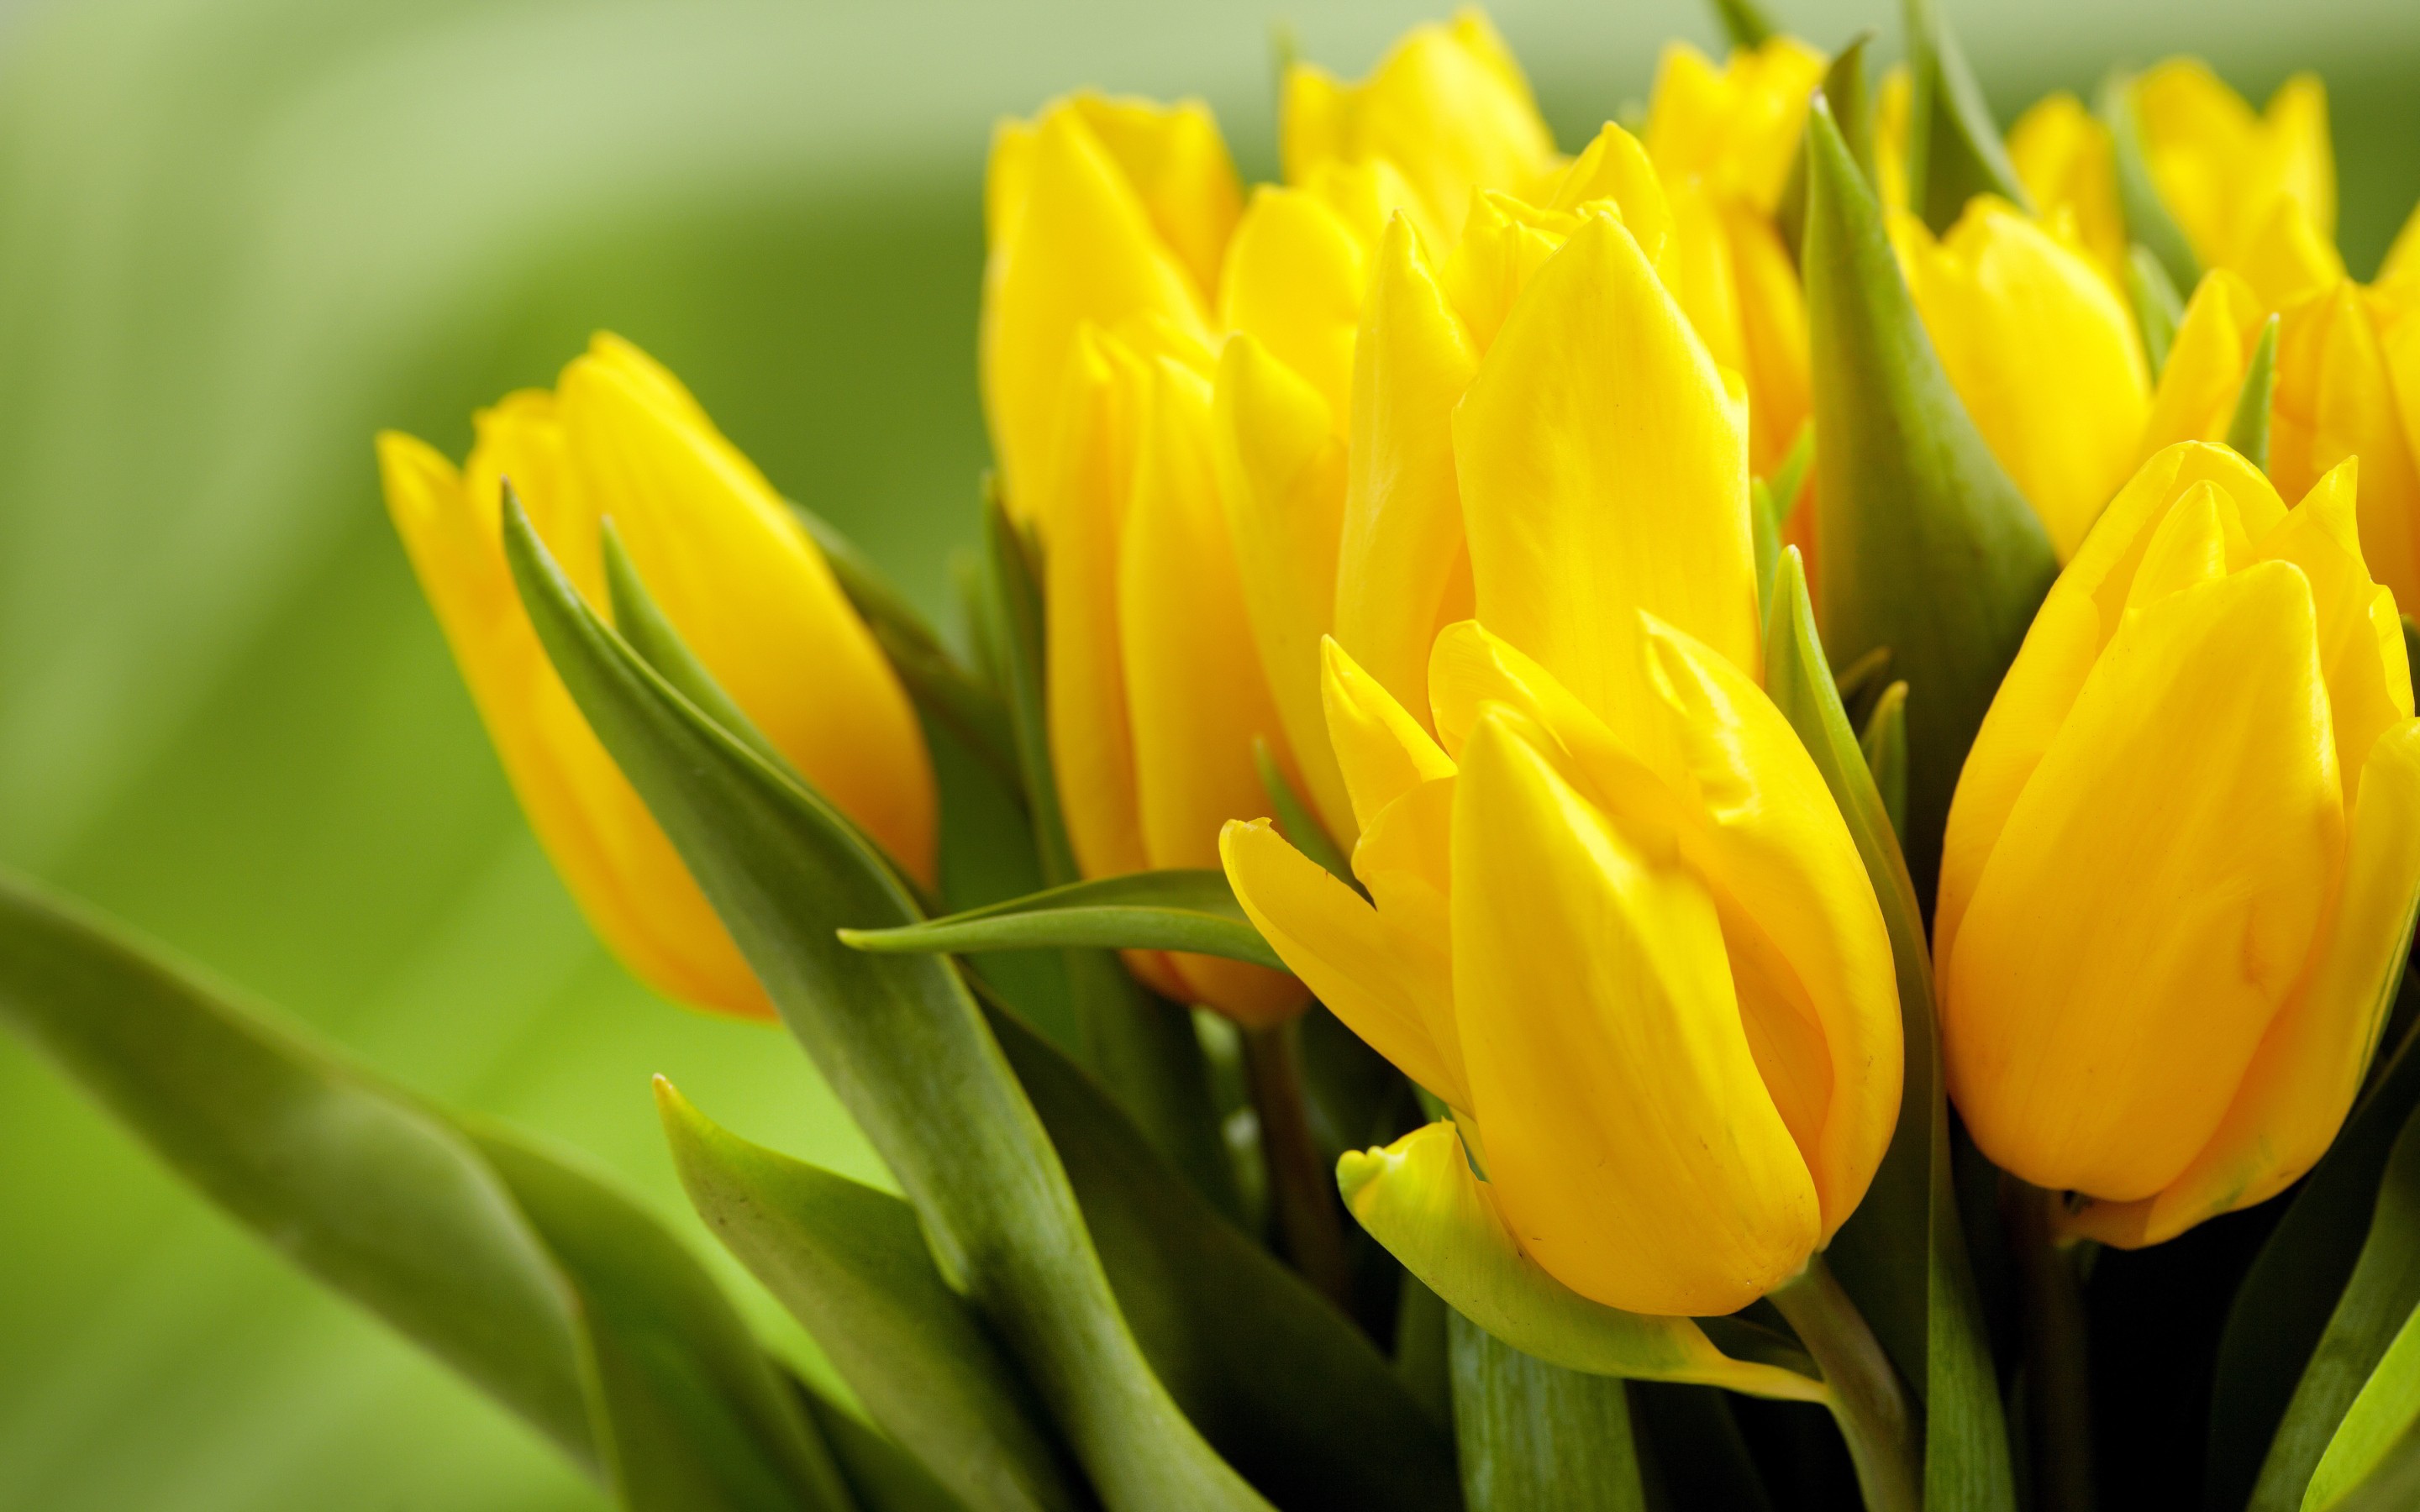 Top 15 Beautiful Yellow Flowers In The World